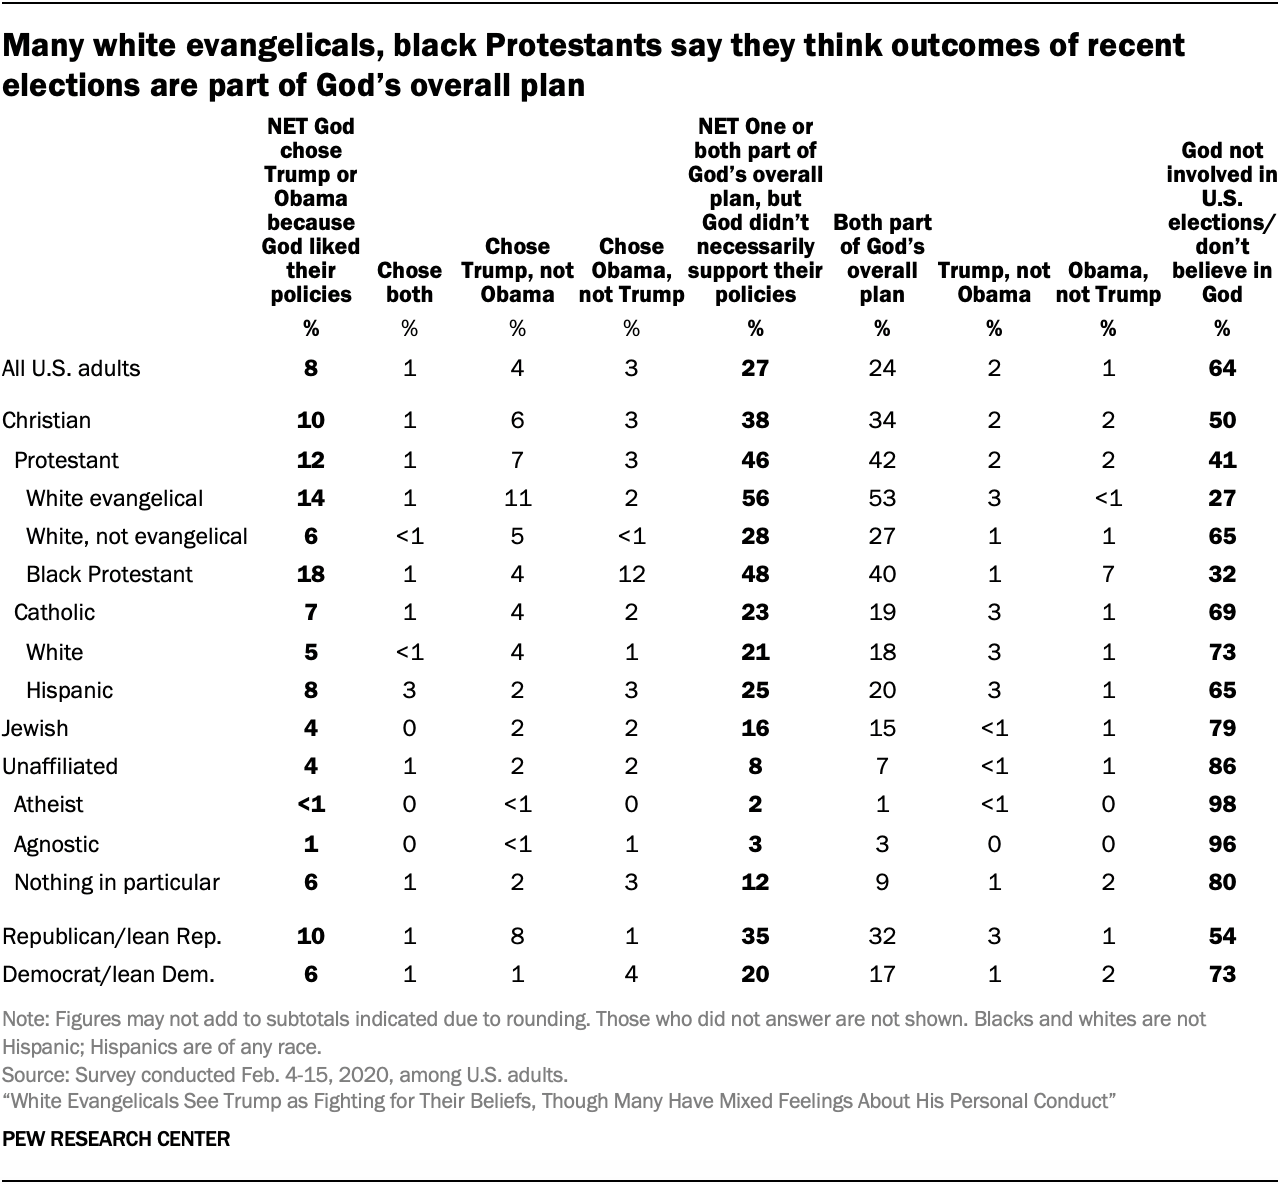 Many white evangelicals, black Protestants say they think outcomes of recent elections are part of God’s overall plan